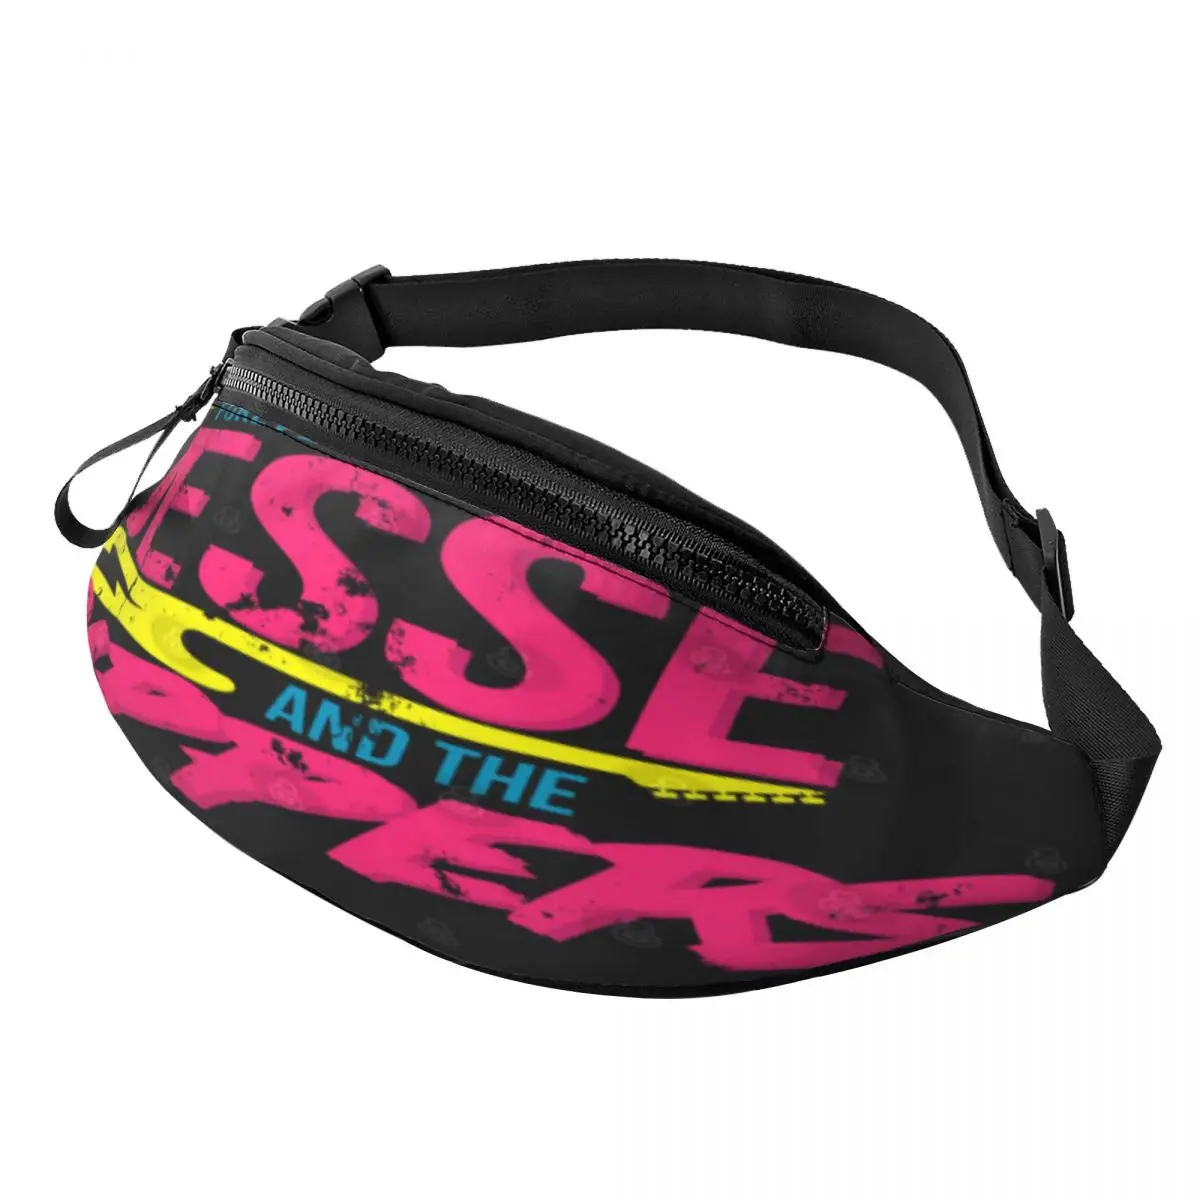 

Jesse And The Rippers Forever Tour 89 Fanny Pack,Waist Bag Personalized Large capacity Out Nice gift Customizable